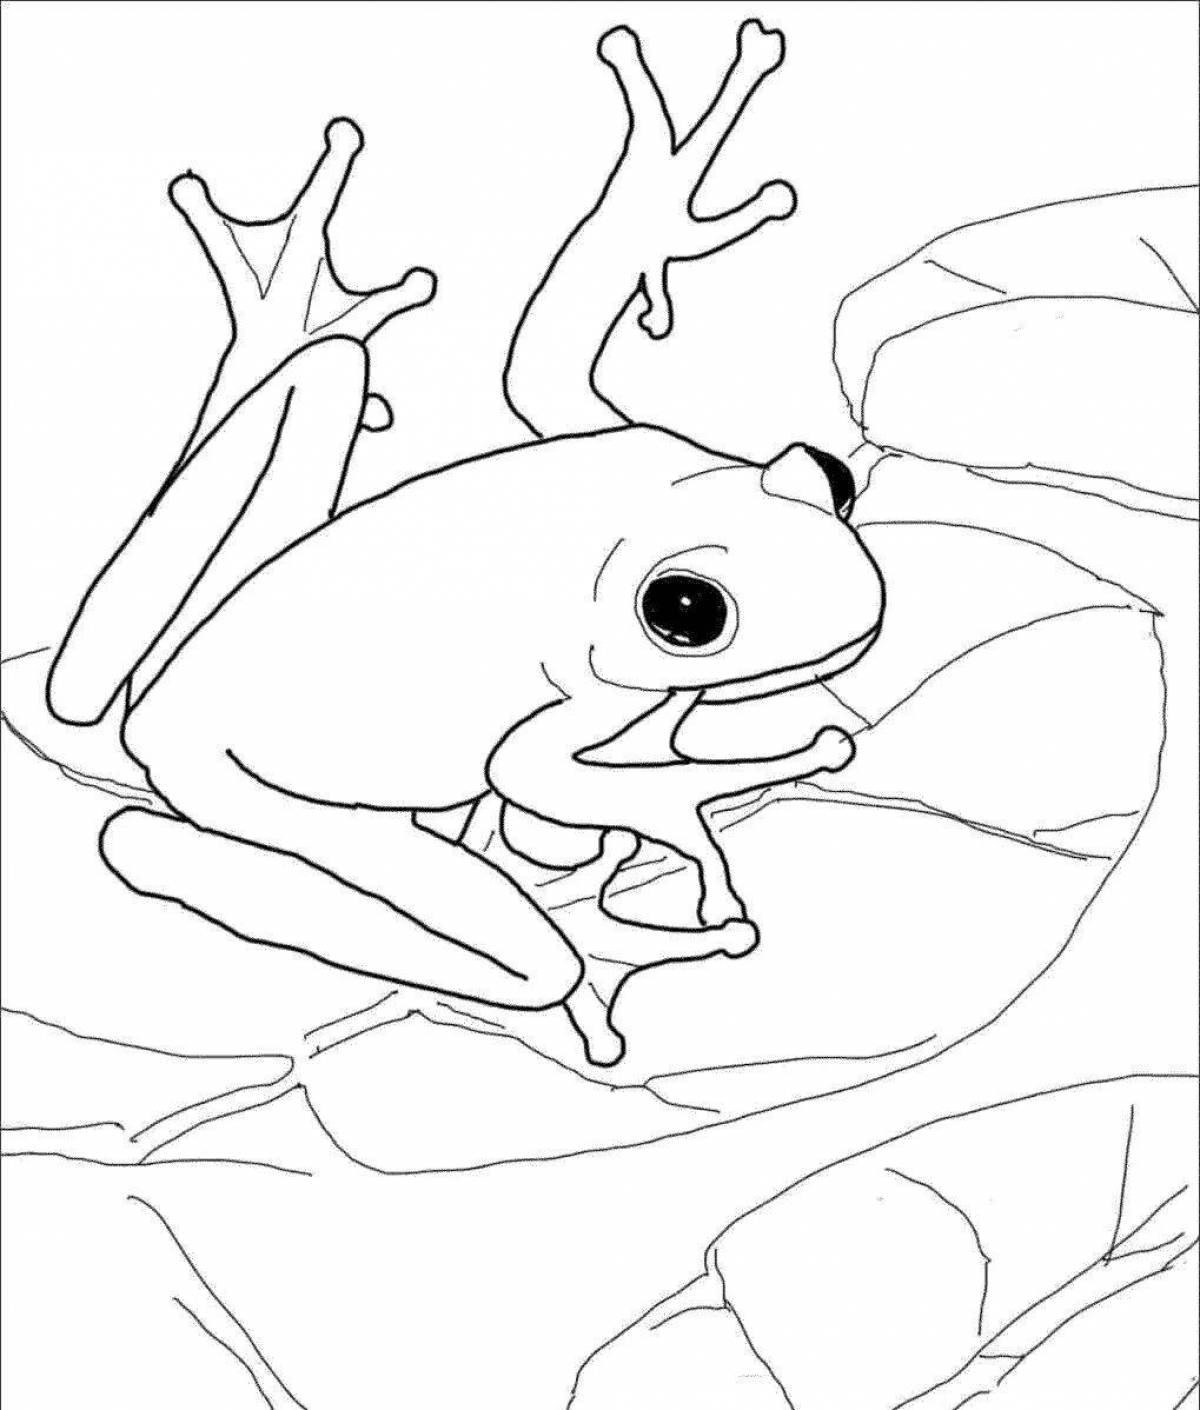 Coloring page funny frog